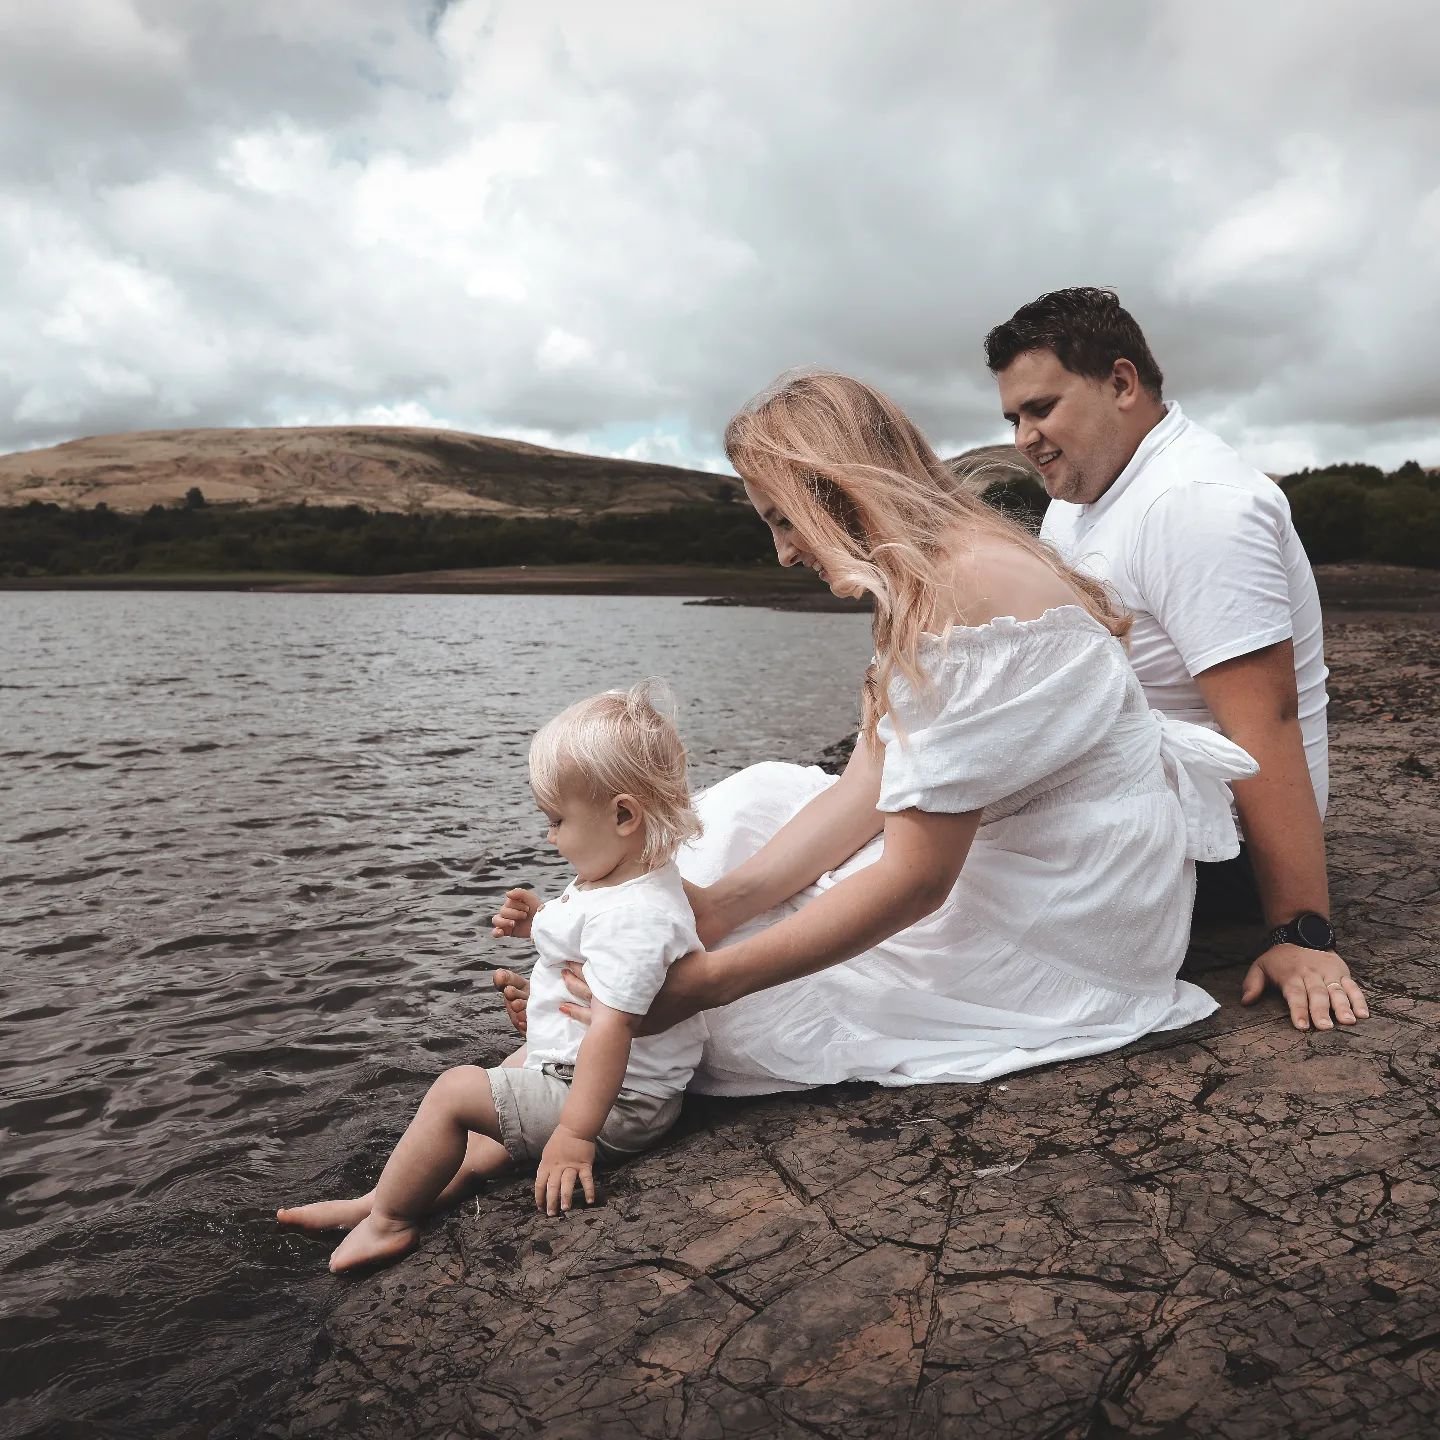 There are still spaces left for my Spring Minis! We'll be down by the water at Watergrove Reservoir on Sunday 5th May. It's such a beautiful location all you have to do is rock up with your family for 15 mins of fun and you'll have gorgeous photos to